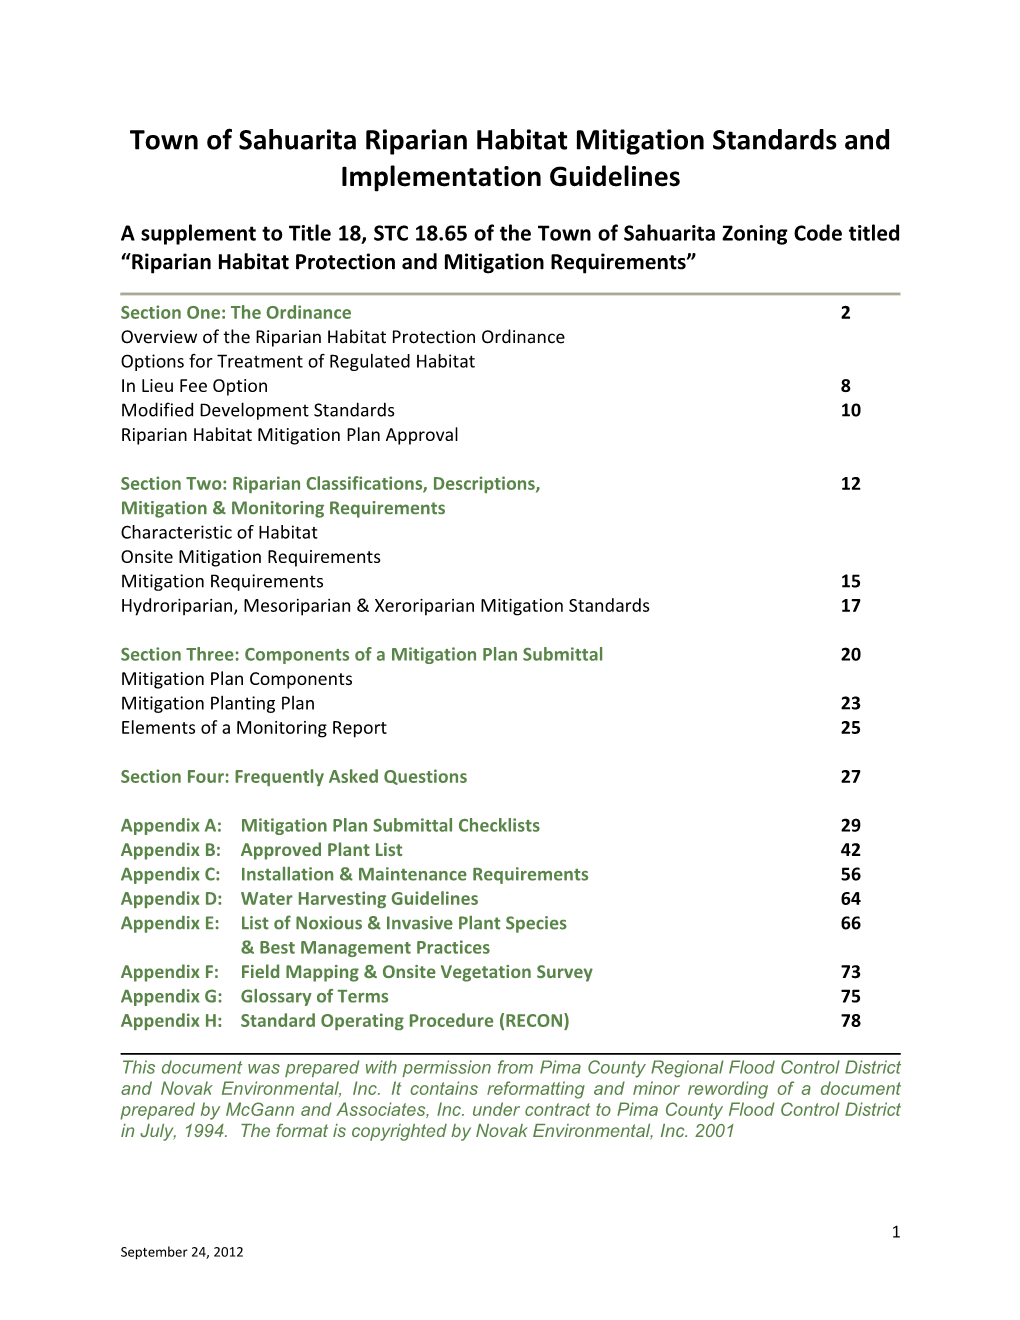 Riparian Habitat Mitigation Standards and Implementation Guidelines